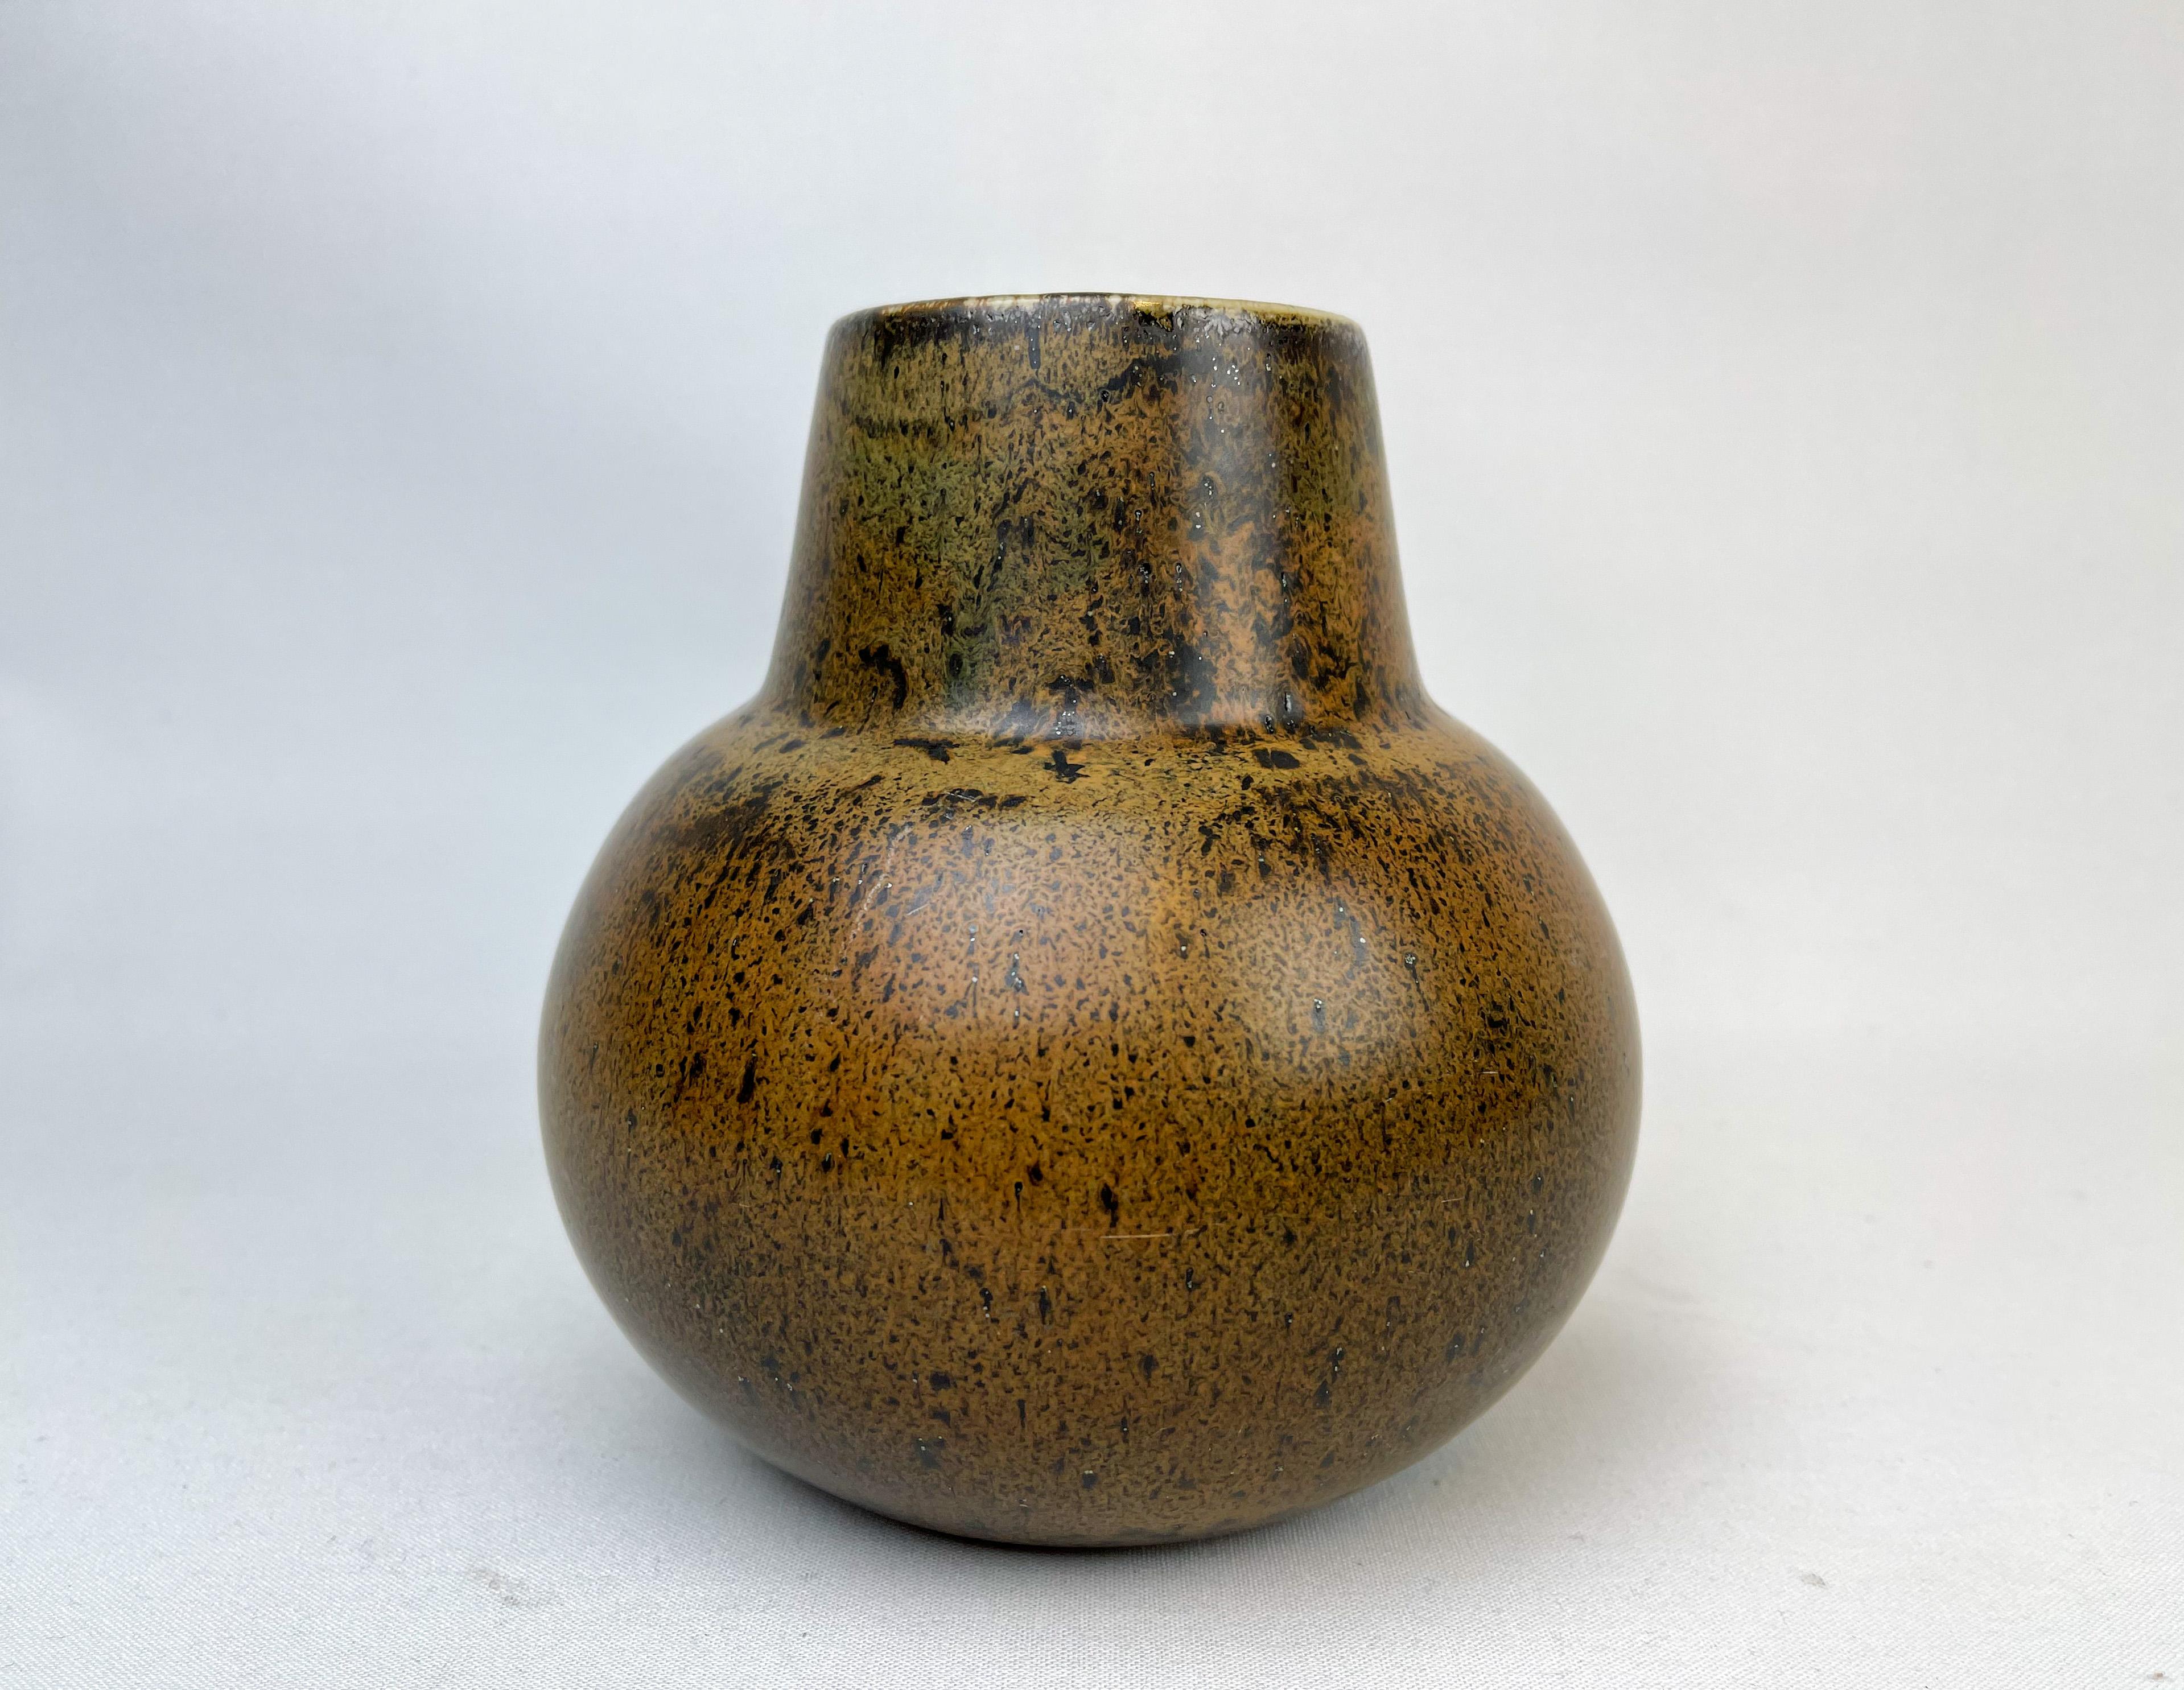 Round studio vase from Rörstrand and maker/designer Carl Harry Stålhane. Made in Sweden in the midcentury. Beautiful glazed vases in good condition. 

Dimensions: H 16 cm, D 15cm.